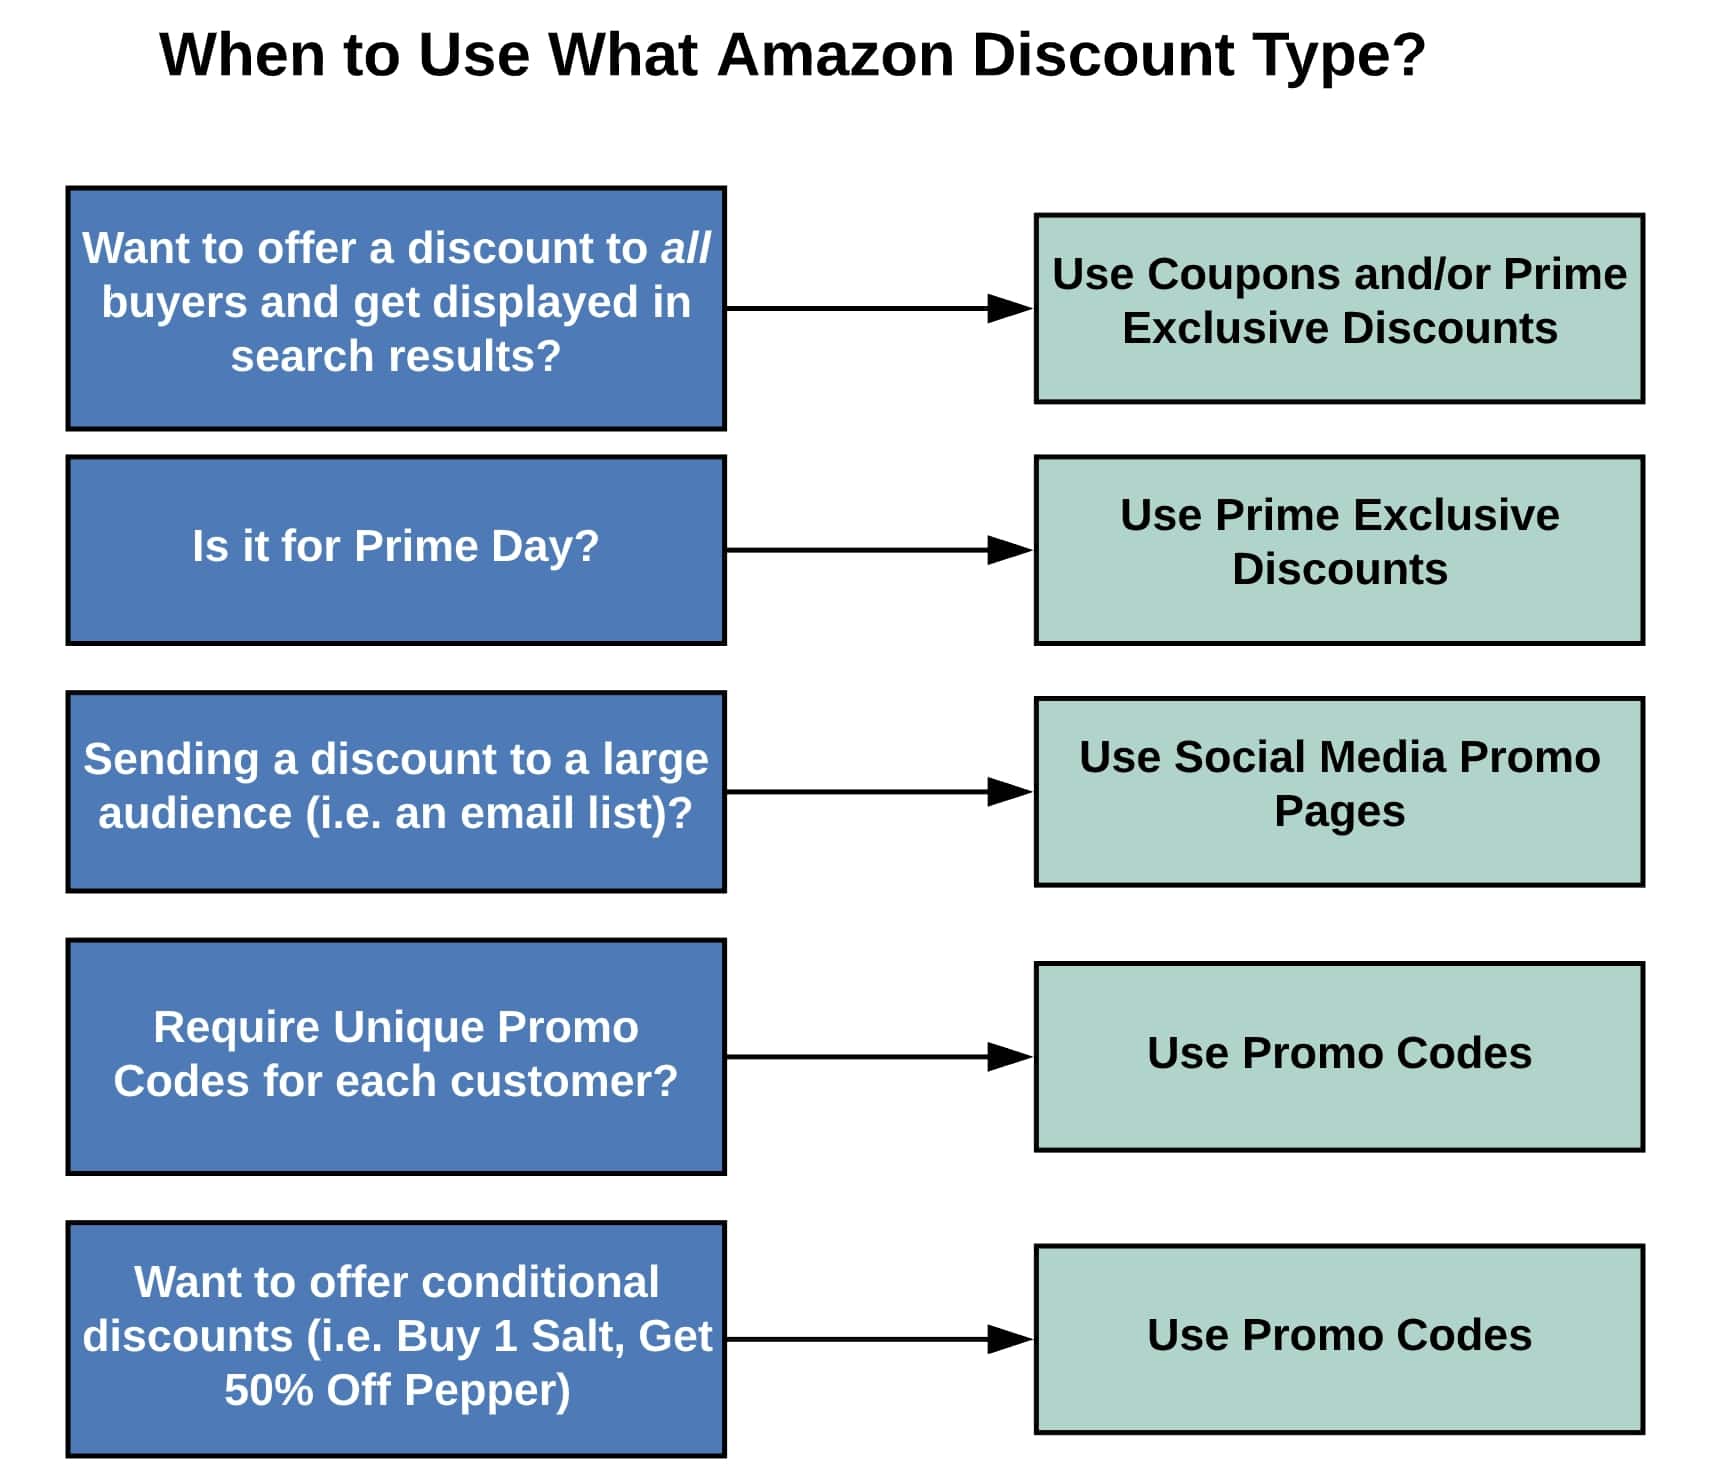 How to Apply Promo Codes or Coupons on a Customer Order